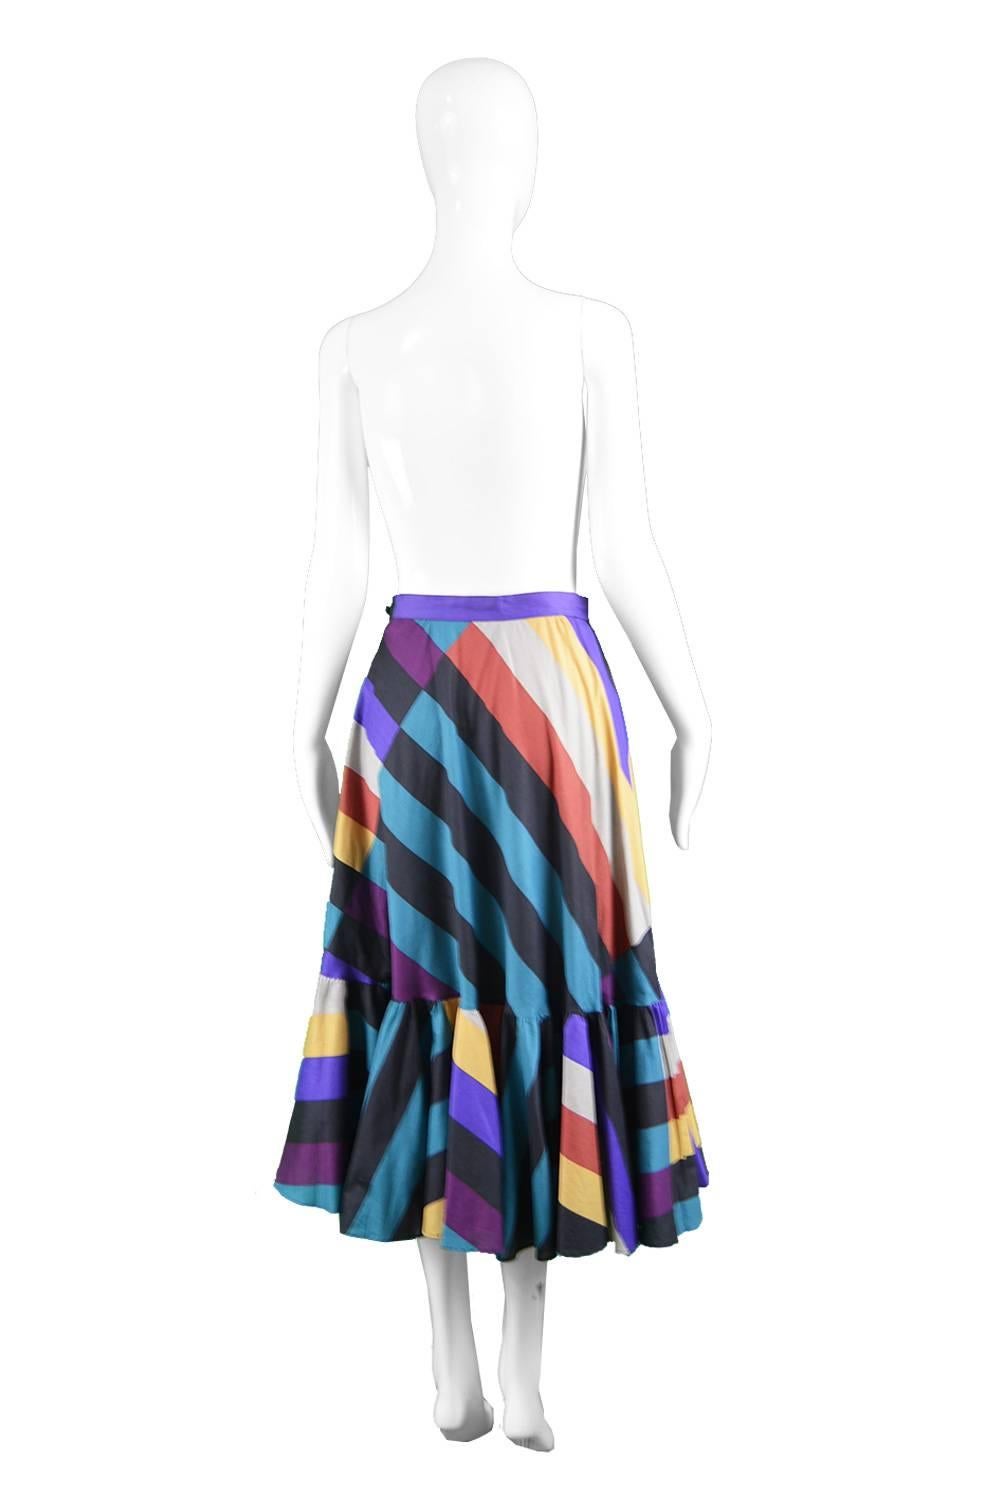 Gucci Vintage Colorful Striped Cotton Skirt with Full Flounce Hem, 1970s 1